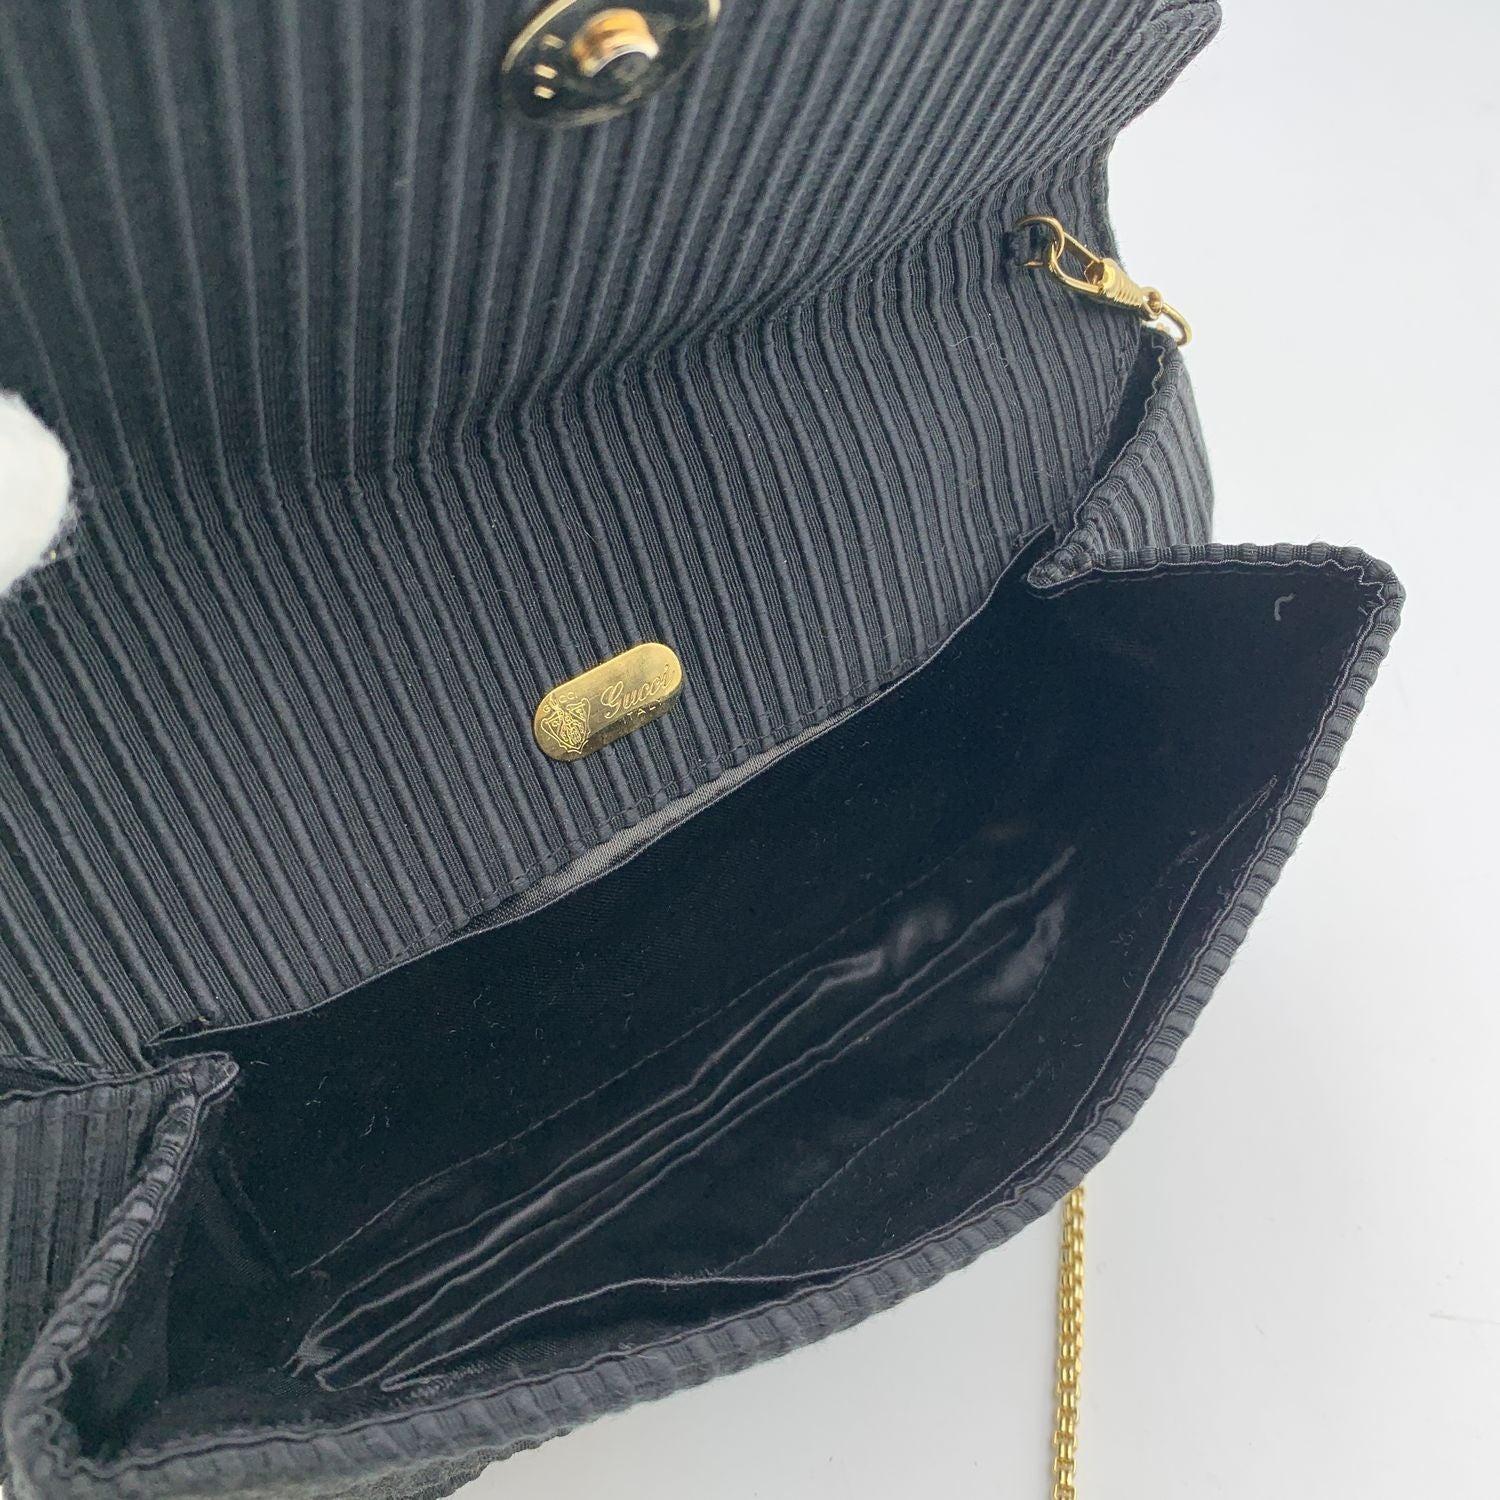 Women's Gucci Vintage Black Ribbed Bow Evening Bag with Chain Strap